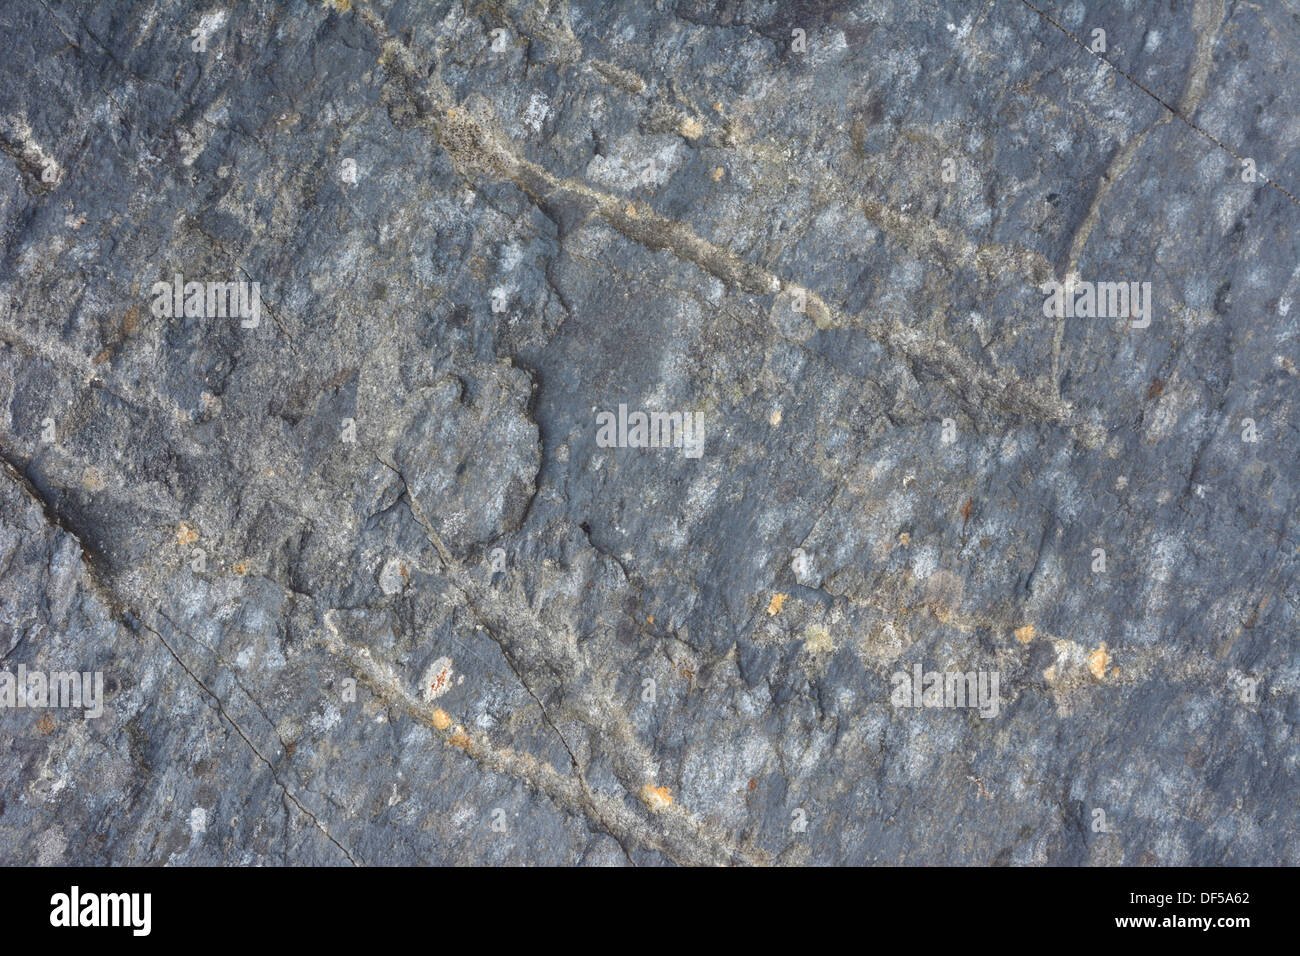 Rock textures for backgrounds ot texture files. Stock Photo